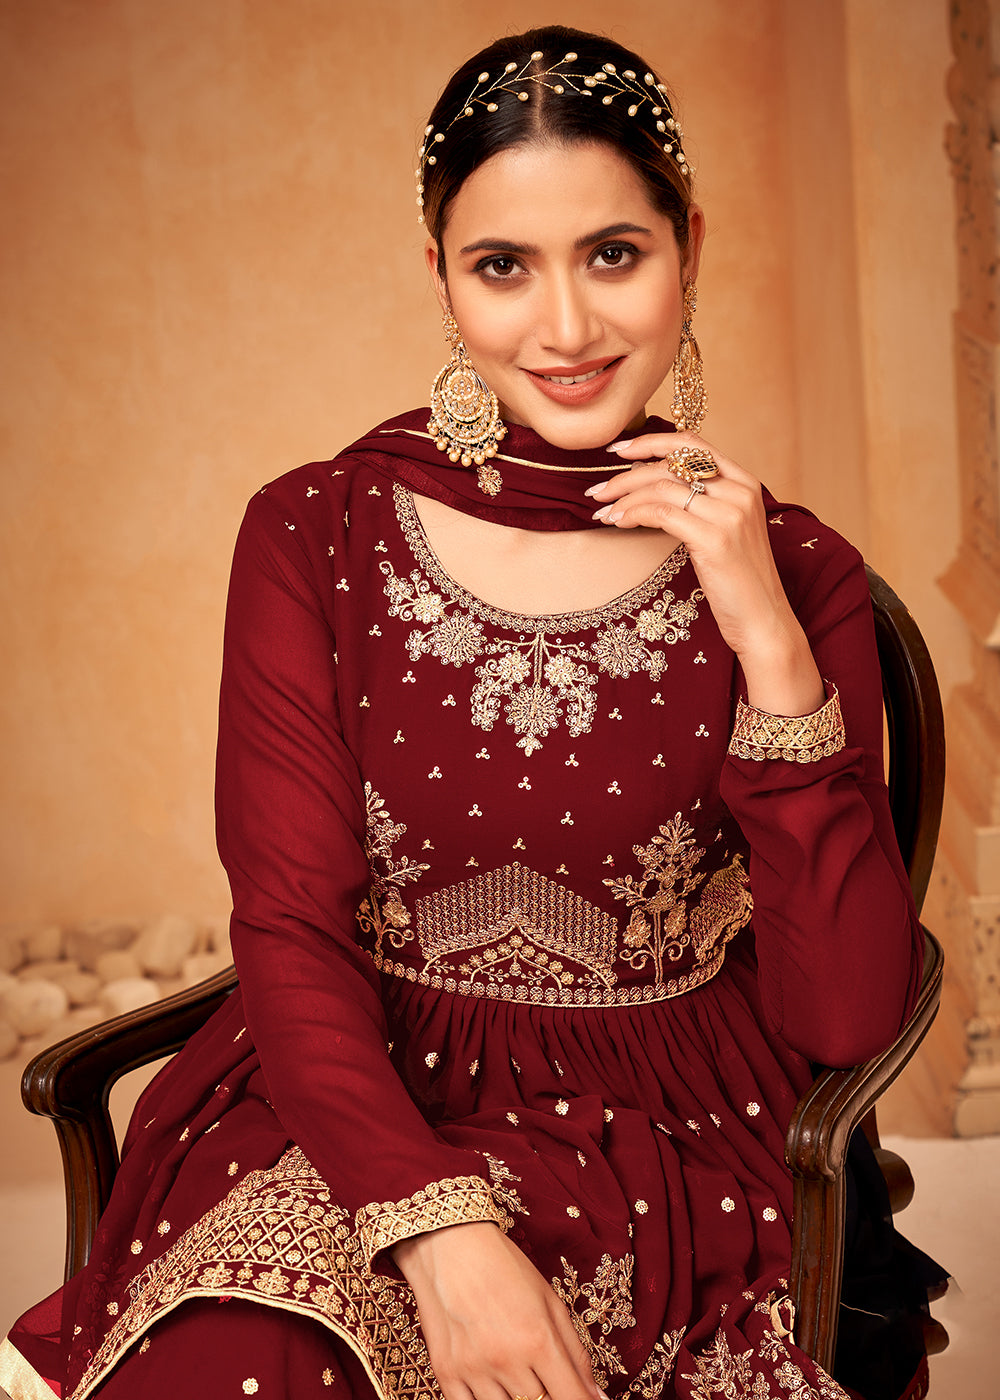 Shop Now Appealing Maroon Embroidered Wedding Festive Gharara Suit Online at Empress Clothing in USA, UK, Canada, Germany & Worldwide. 